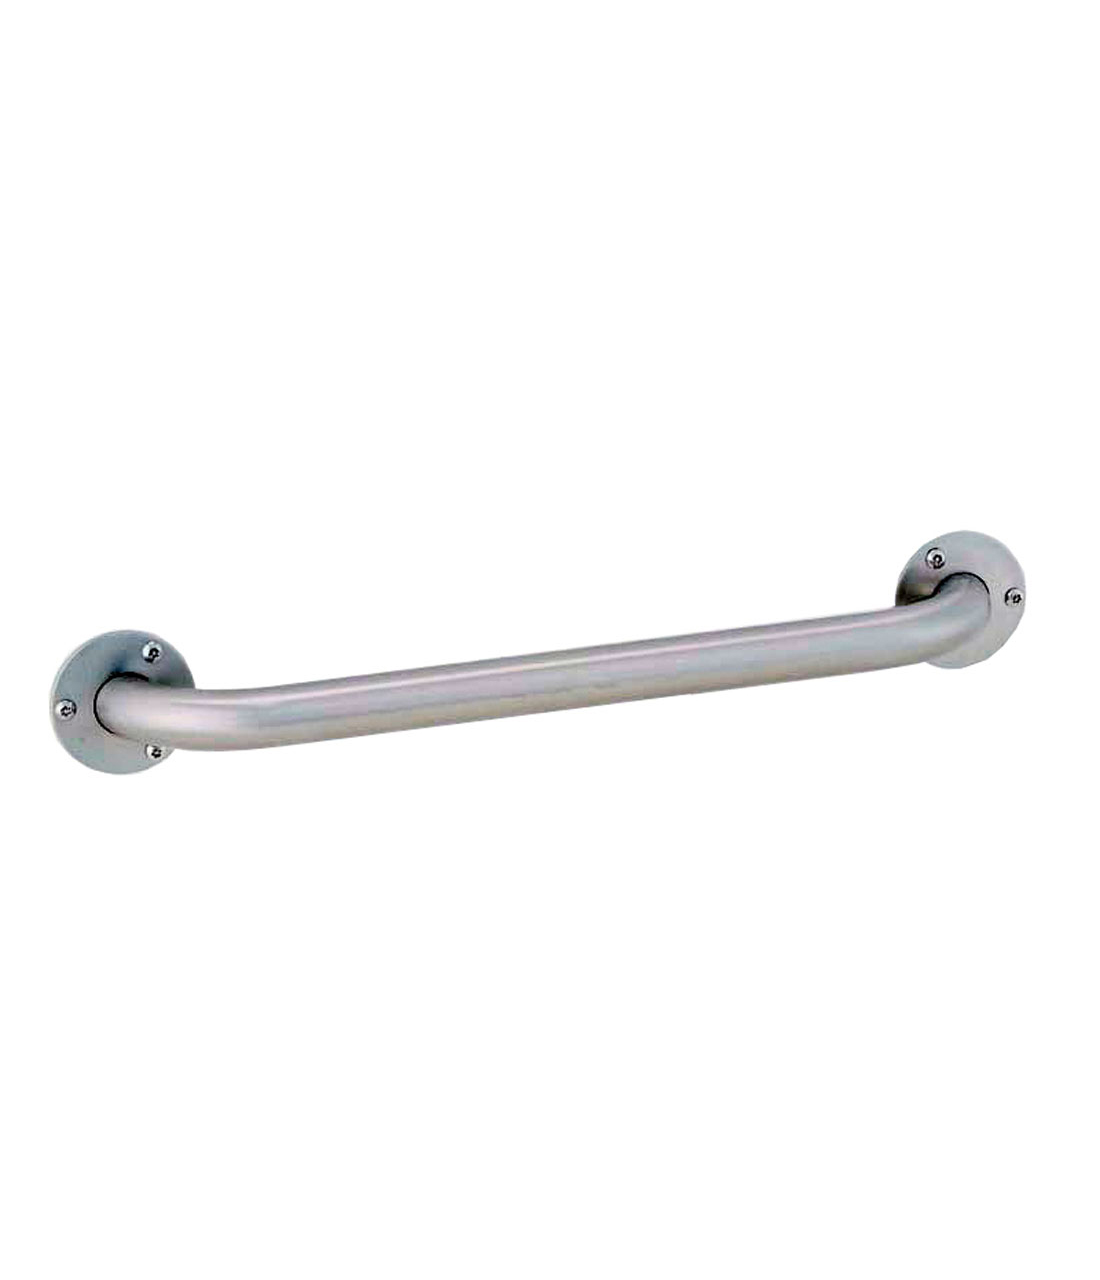 1.25 Inch Diameter Straight Grab Bar with Exposed Flange - (Model #: 125e-series-exposed) Image